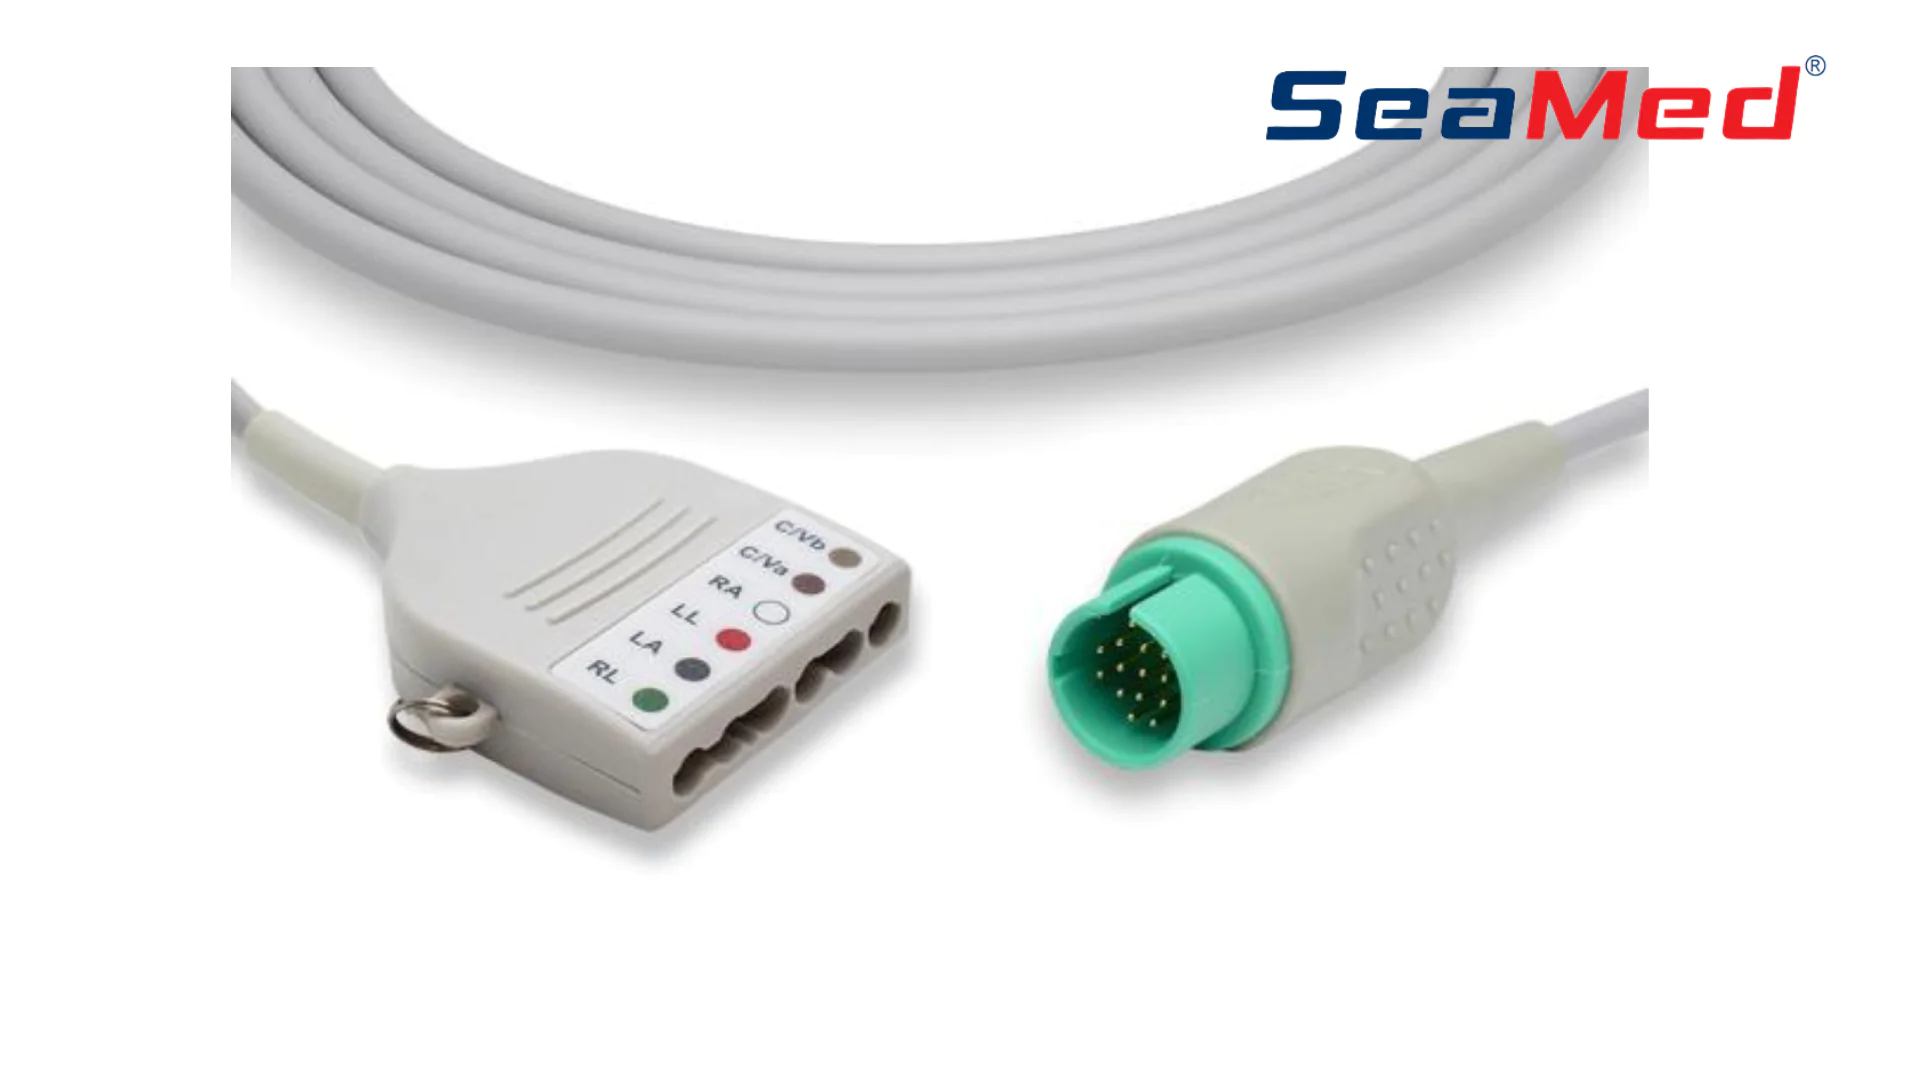 SPACELABS COMPATIBLE 5 LEAD ECG TRUNK CABLE